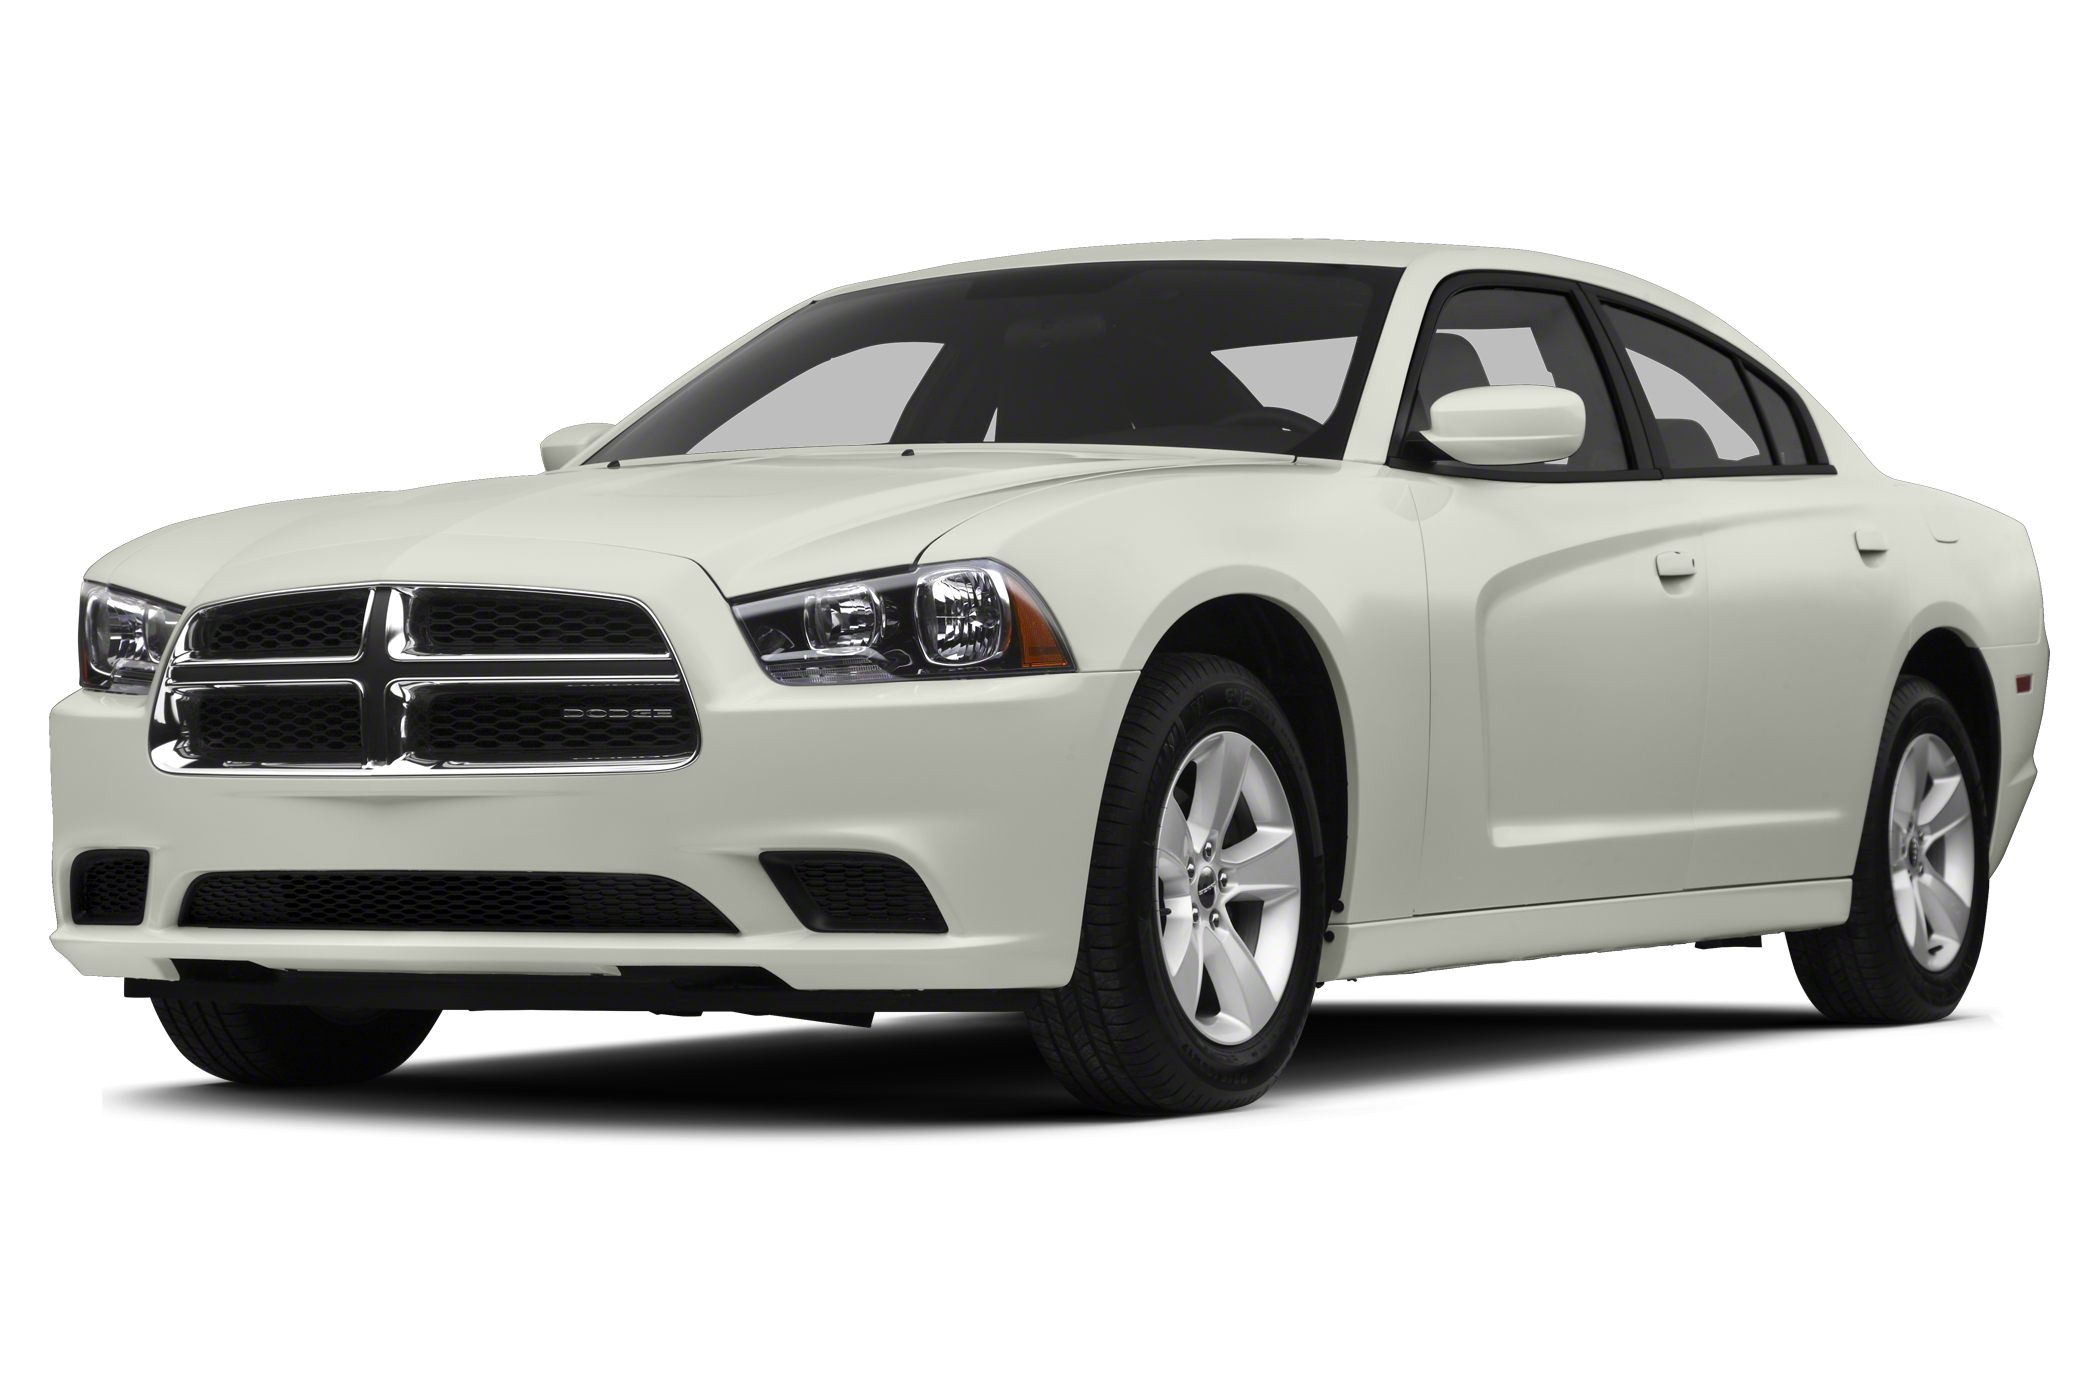 2013 Dodge Charger Safety Features